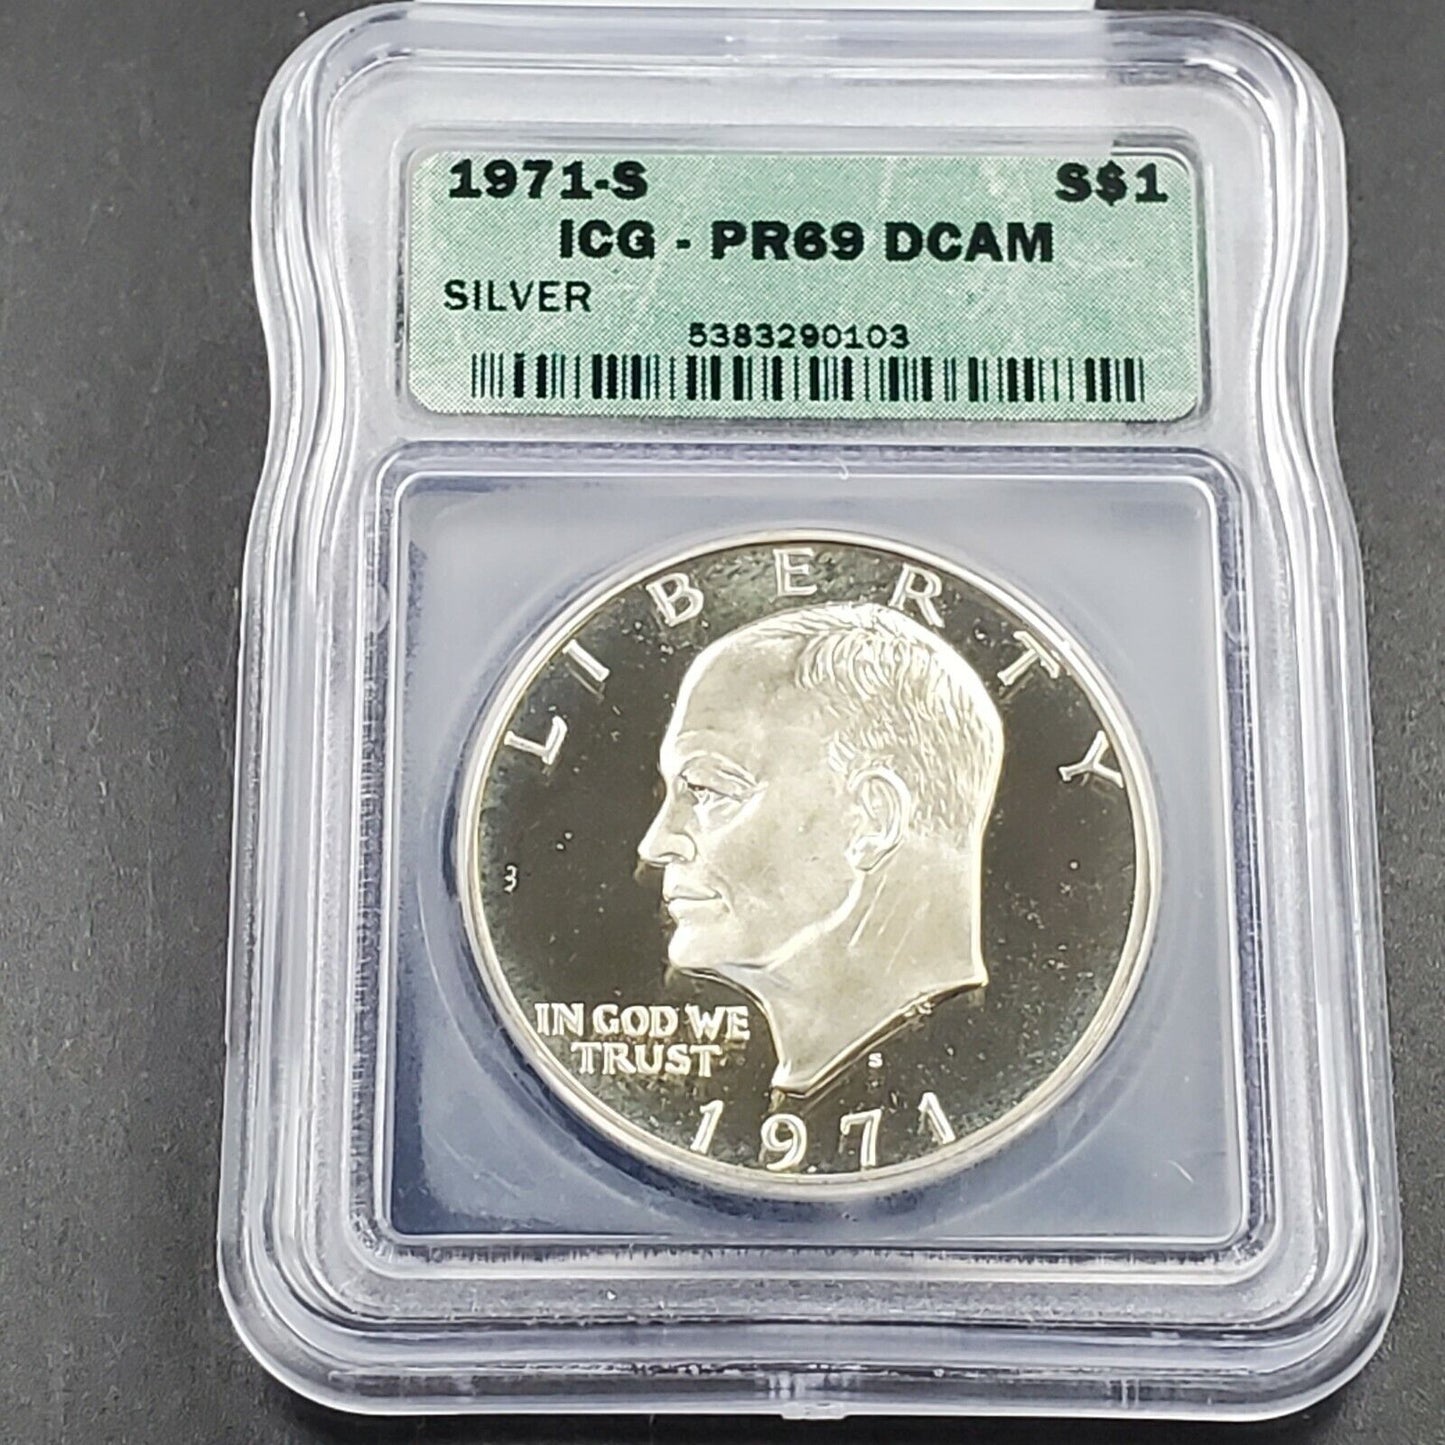 1971 S $1 Eisenhower Brown Ike 40% Silver PR69 DCAM ICG Not much toning some